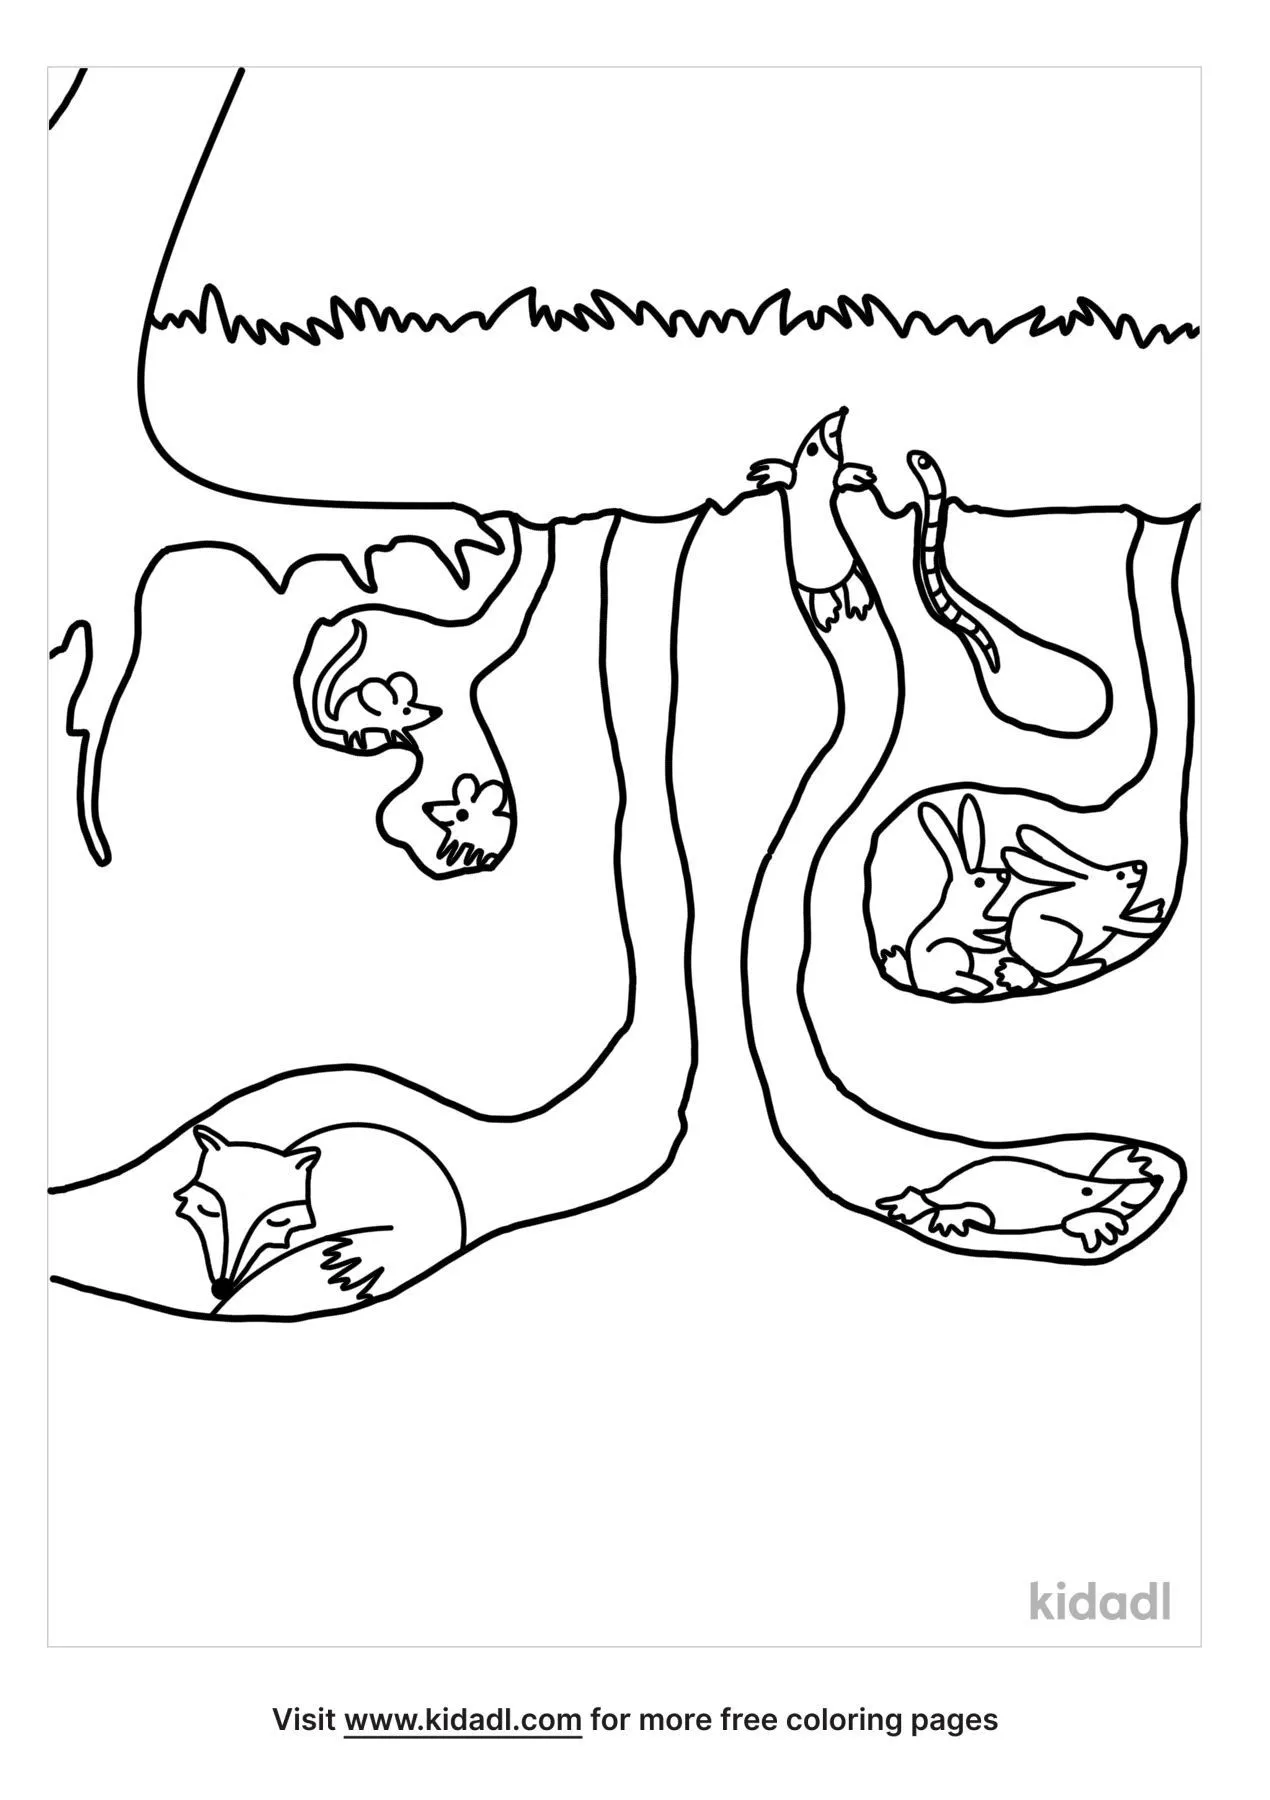 Free Underground Animals Coloring Page | Coloring Page Printables | Kidadl